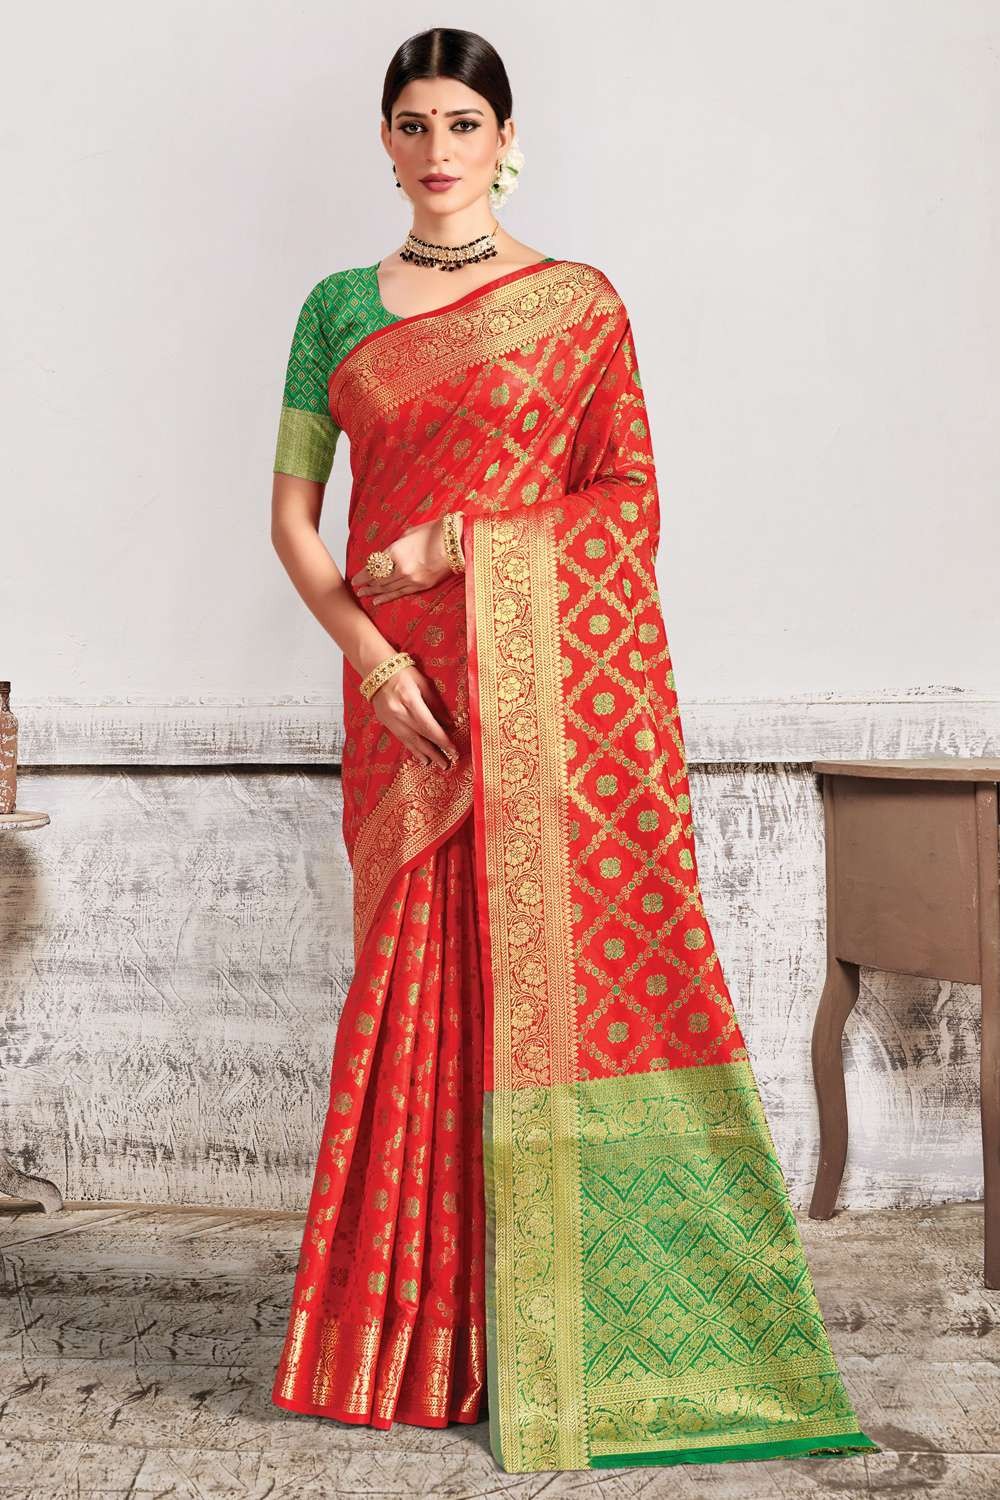 VA Collections - Chilli red koorai saree with simple green blouse as  requested by the bride | Facebook